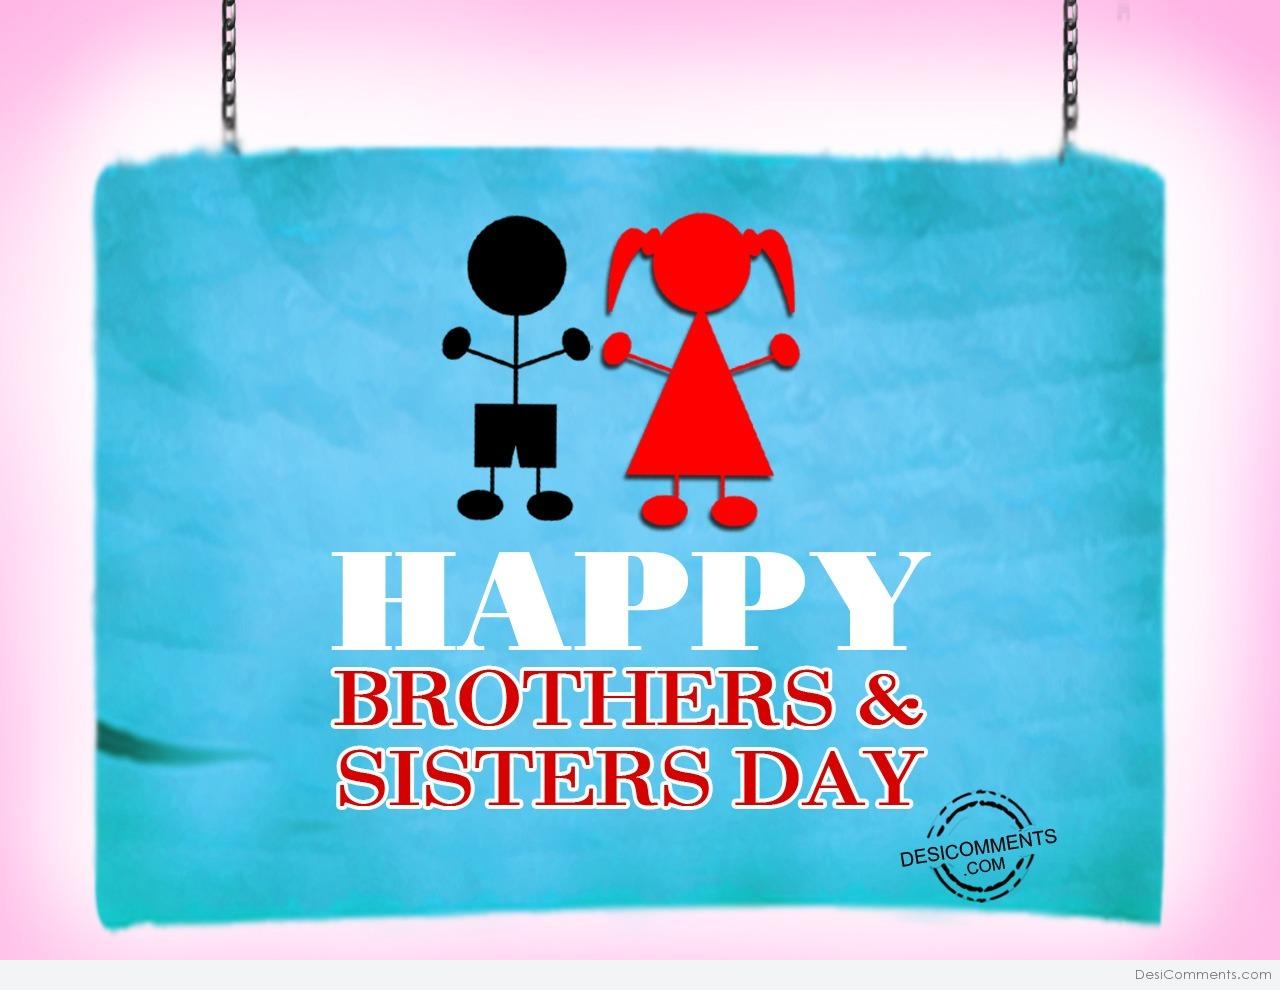 Money sister brother. Brothers and sisters Day. Sister Day. Happy brothers and sisters Day. Brothers and sisters магазин.